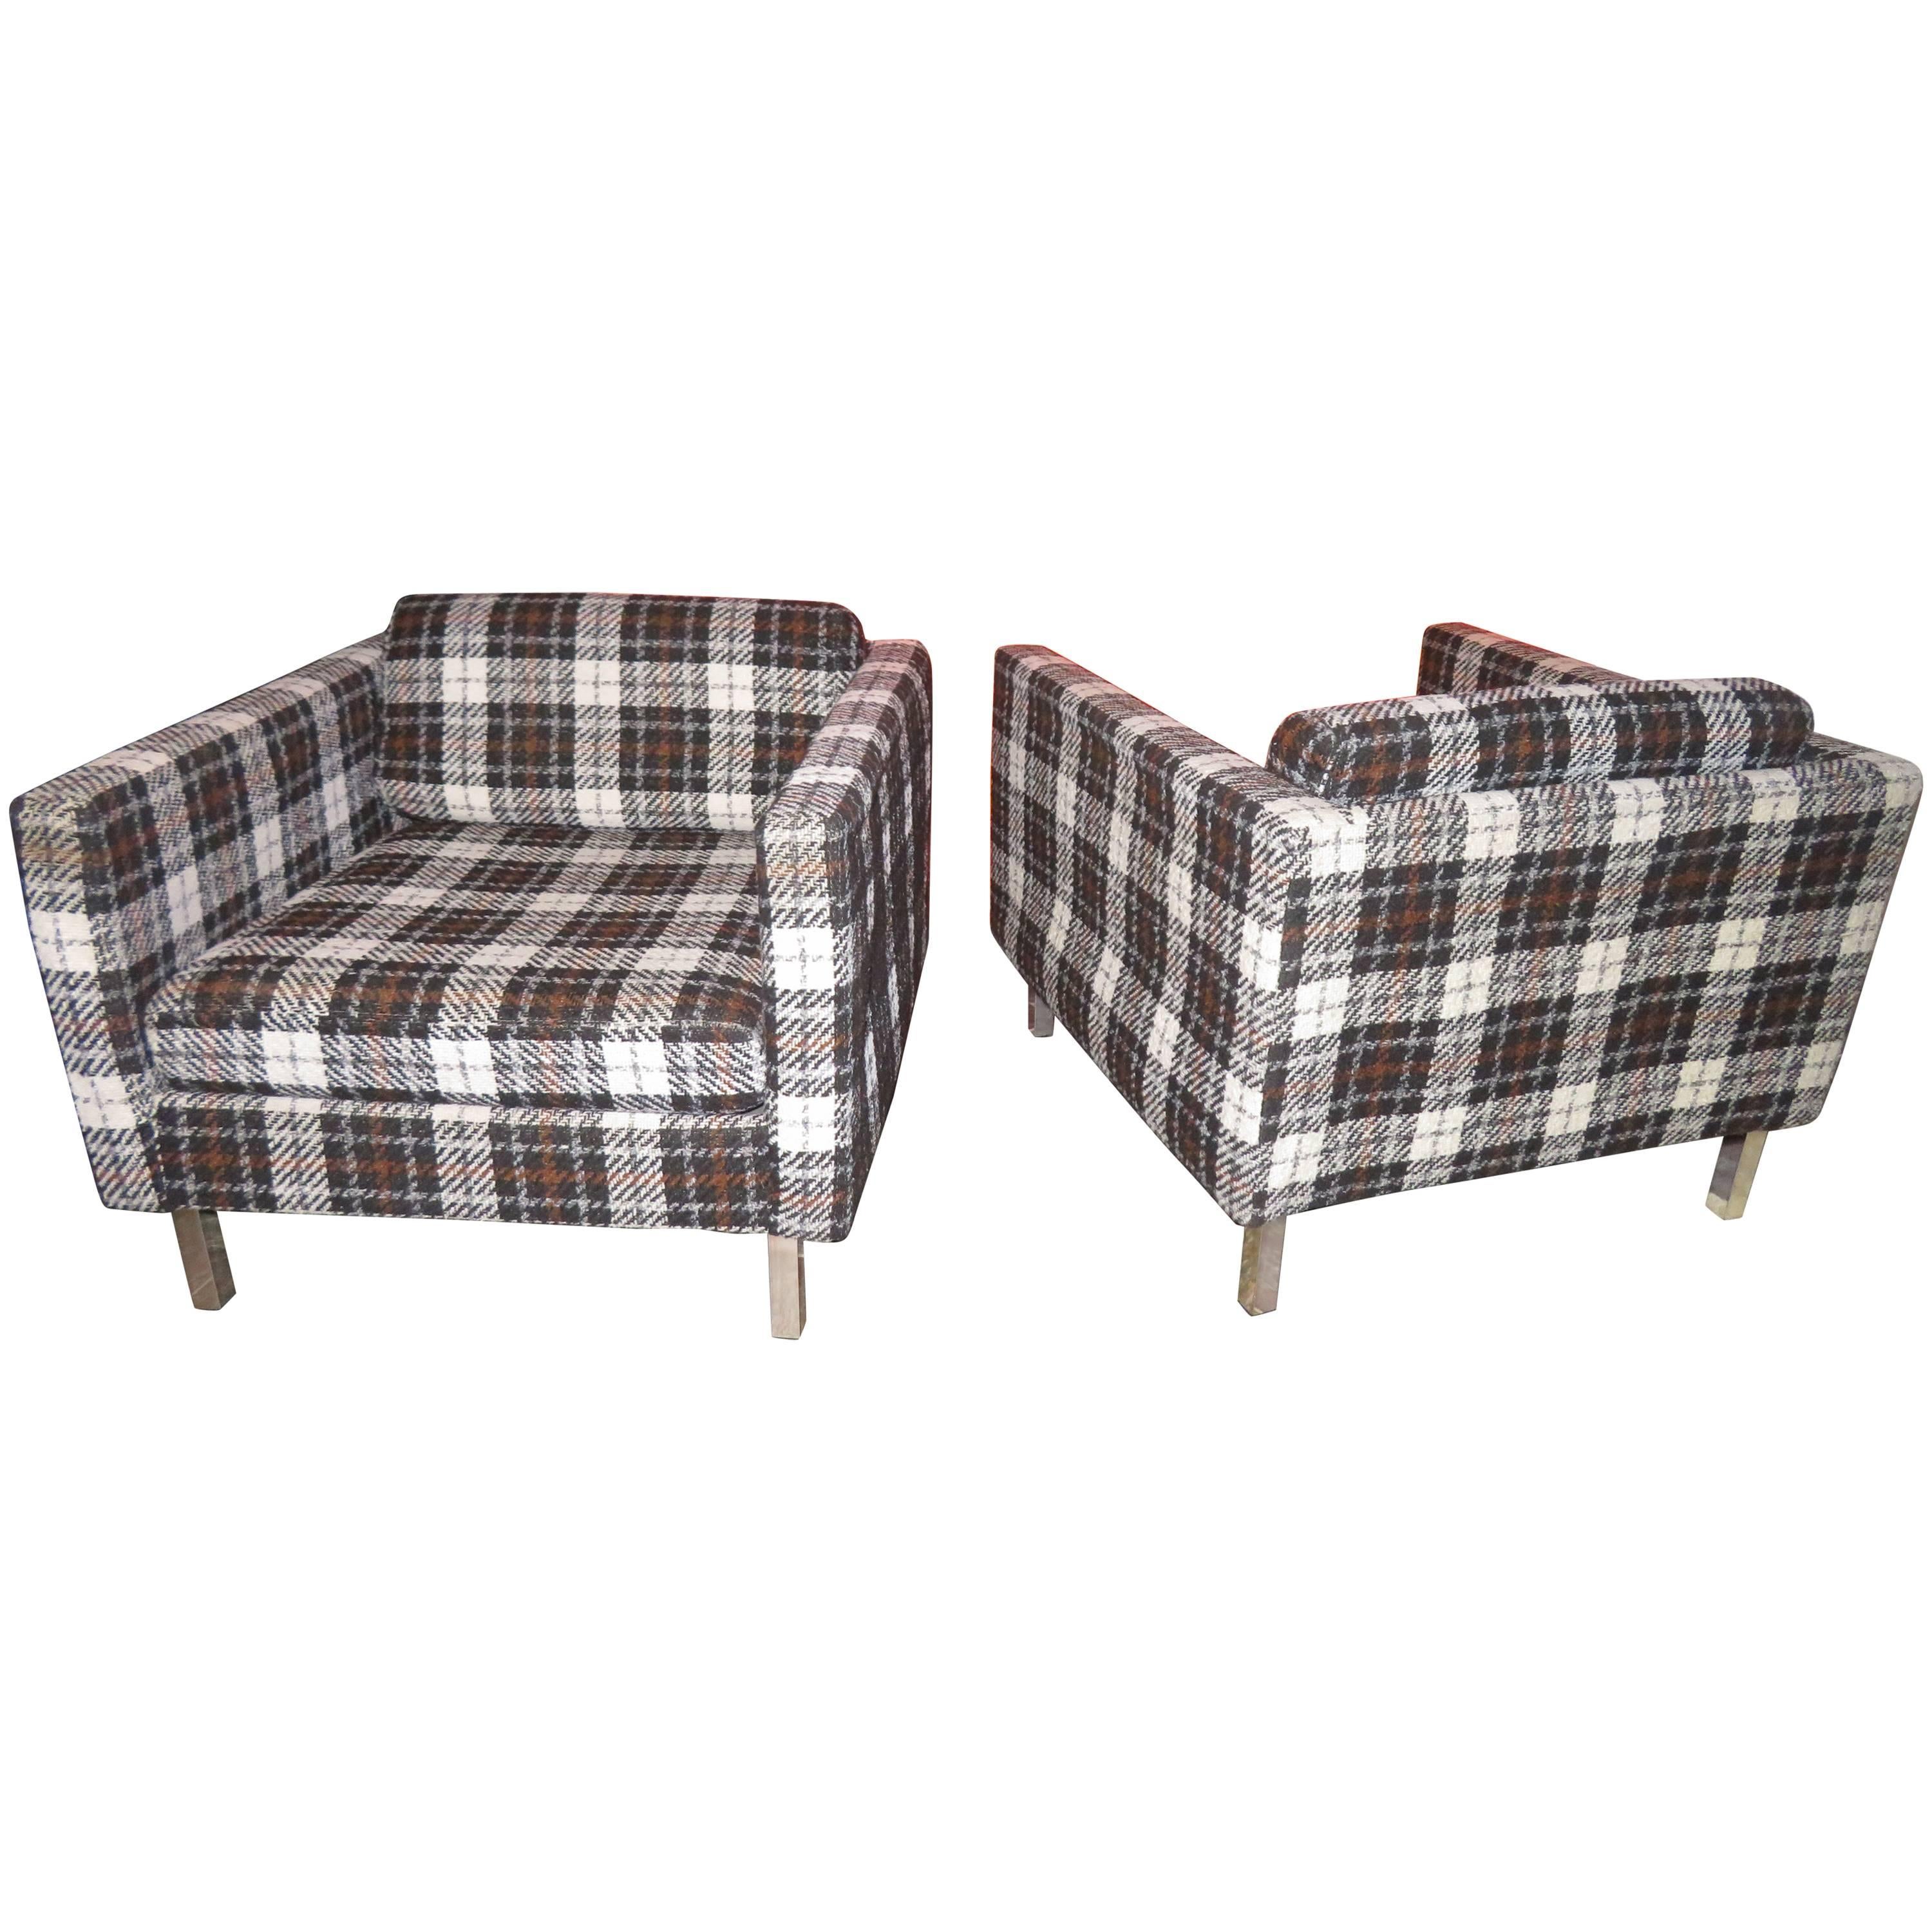 Handsome Pair of Milo Baughman Style Plaid Chrome Cube Lounge Chairs For Sale